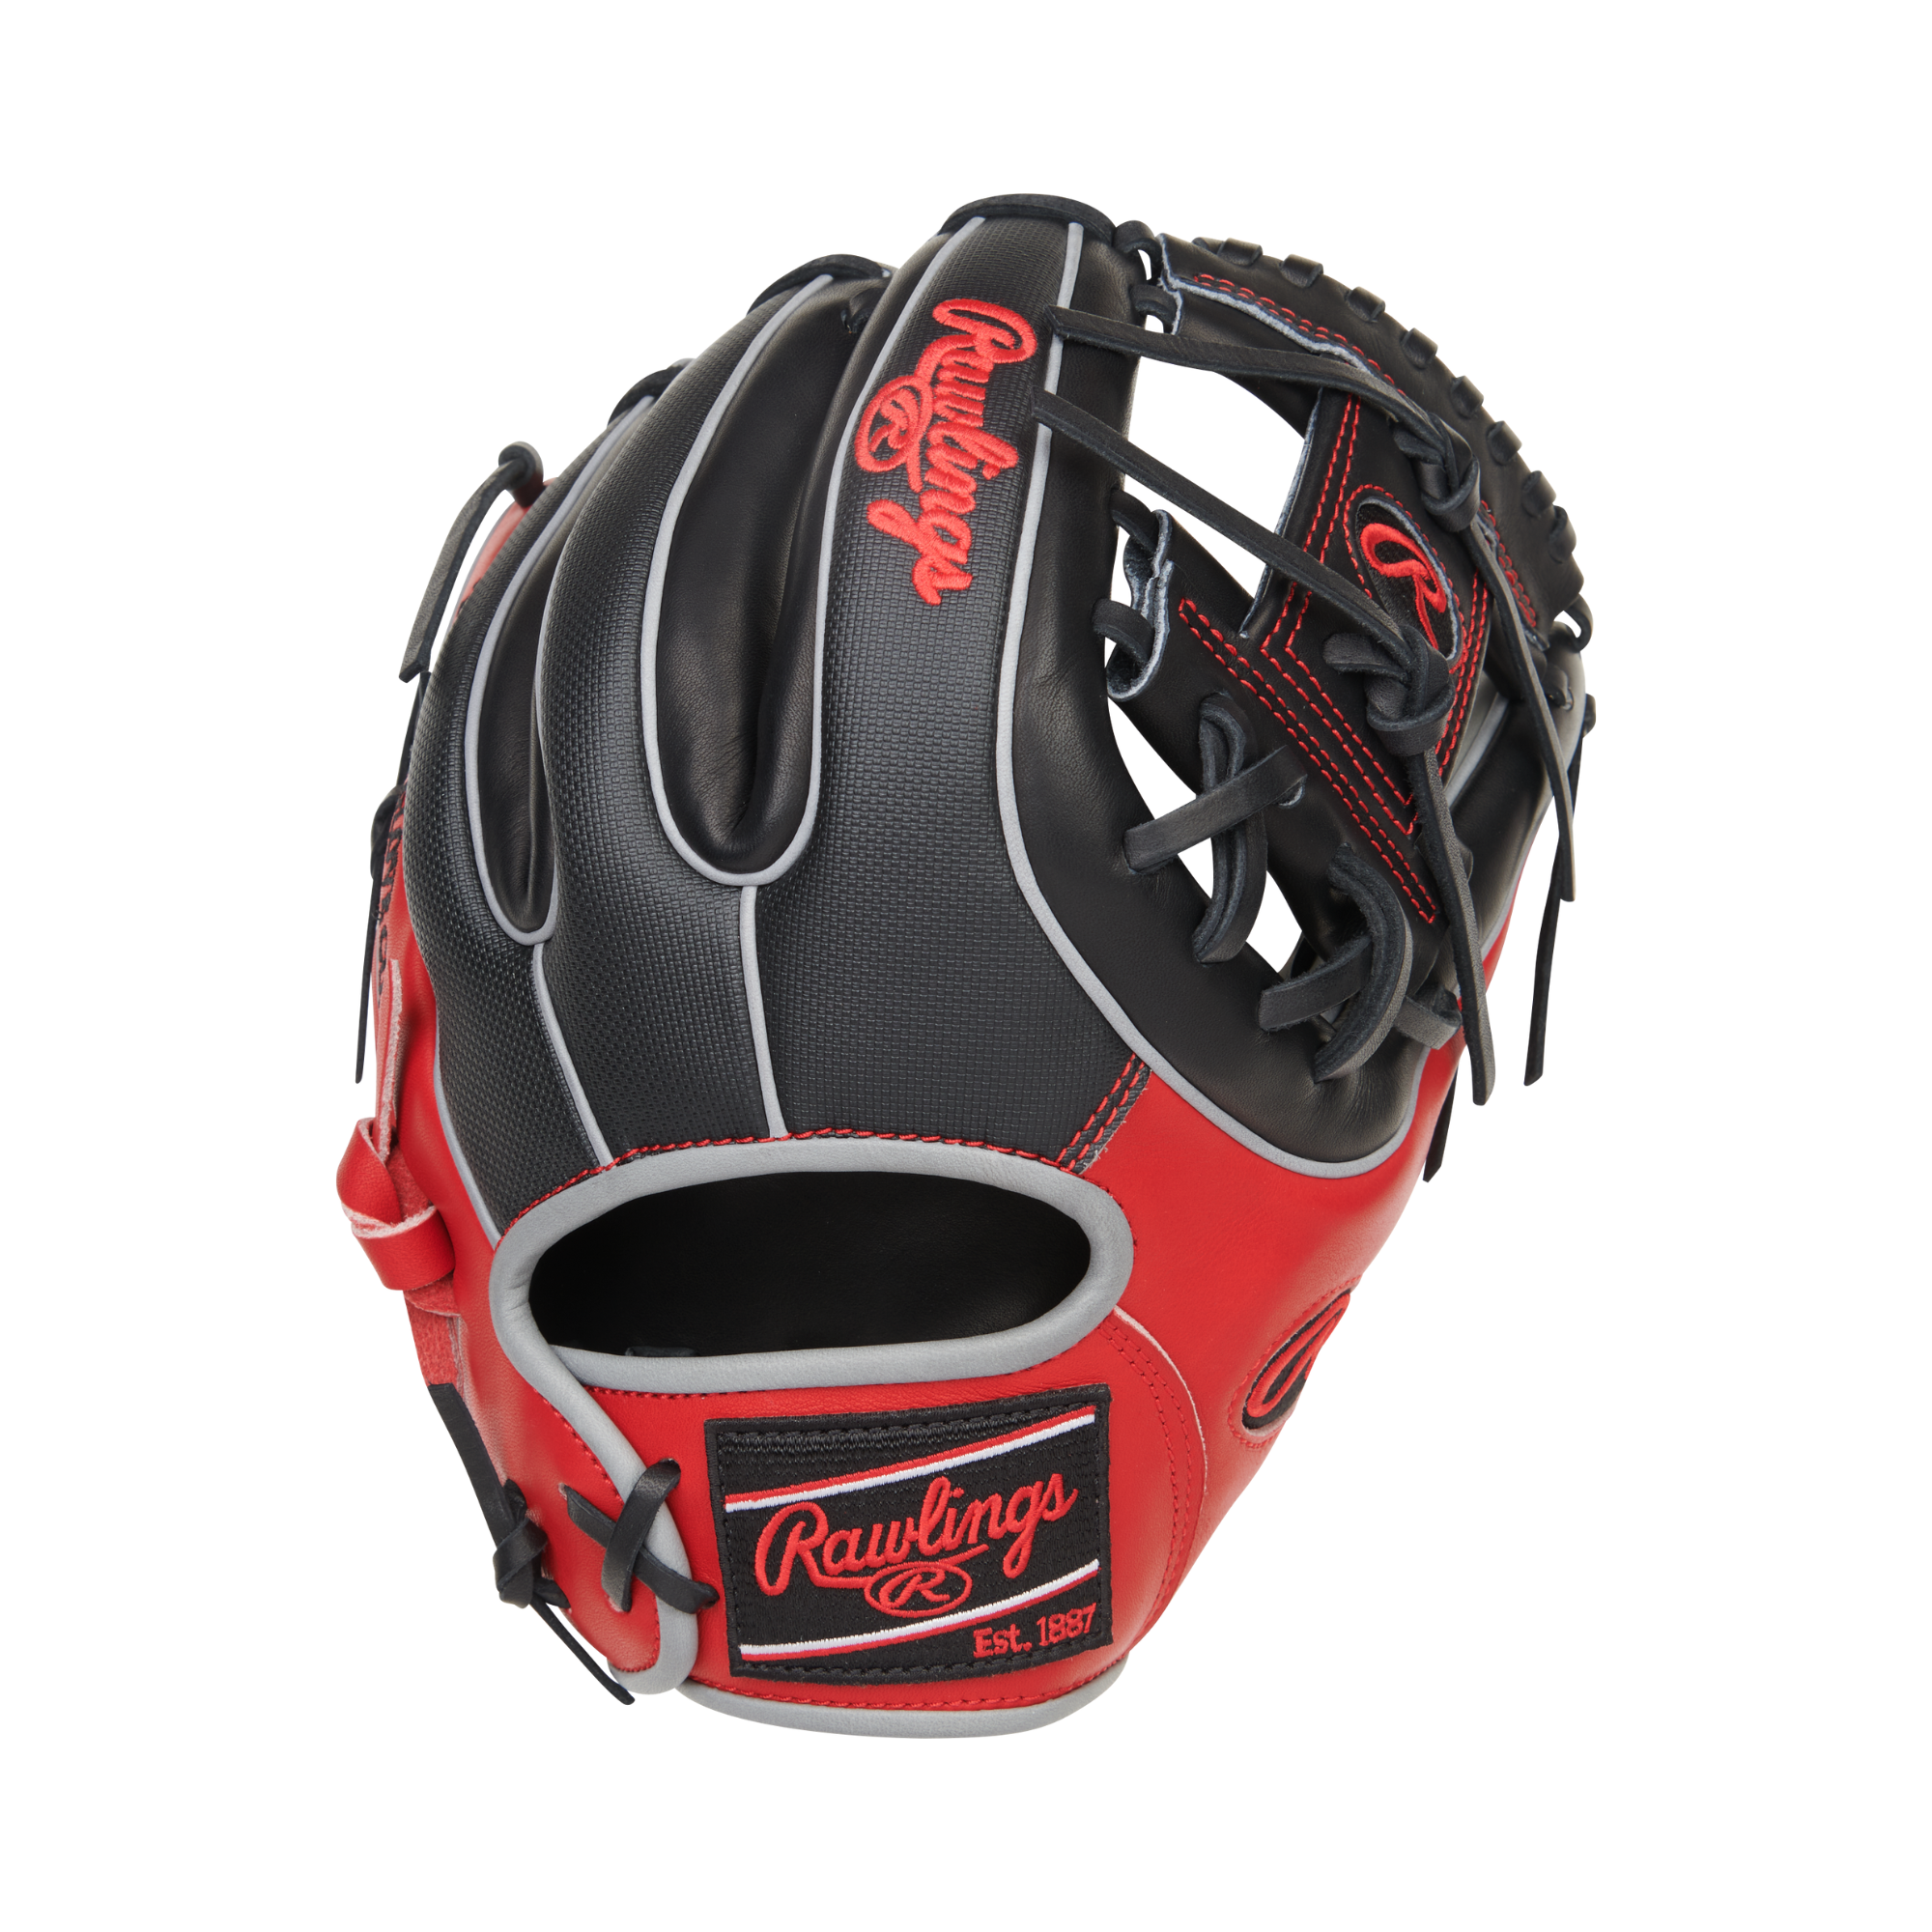 Rawlings May 2022 Gold Glove Club RGGC (GOTM) 11.75-inch Infield Heart of the Hide Red/Black/Grey